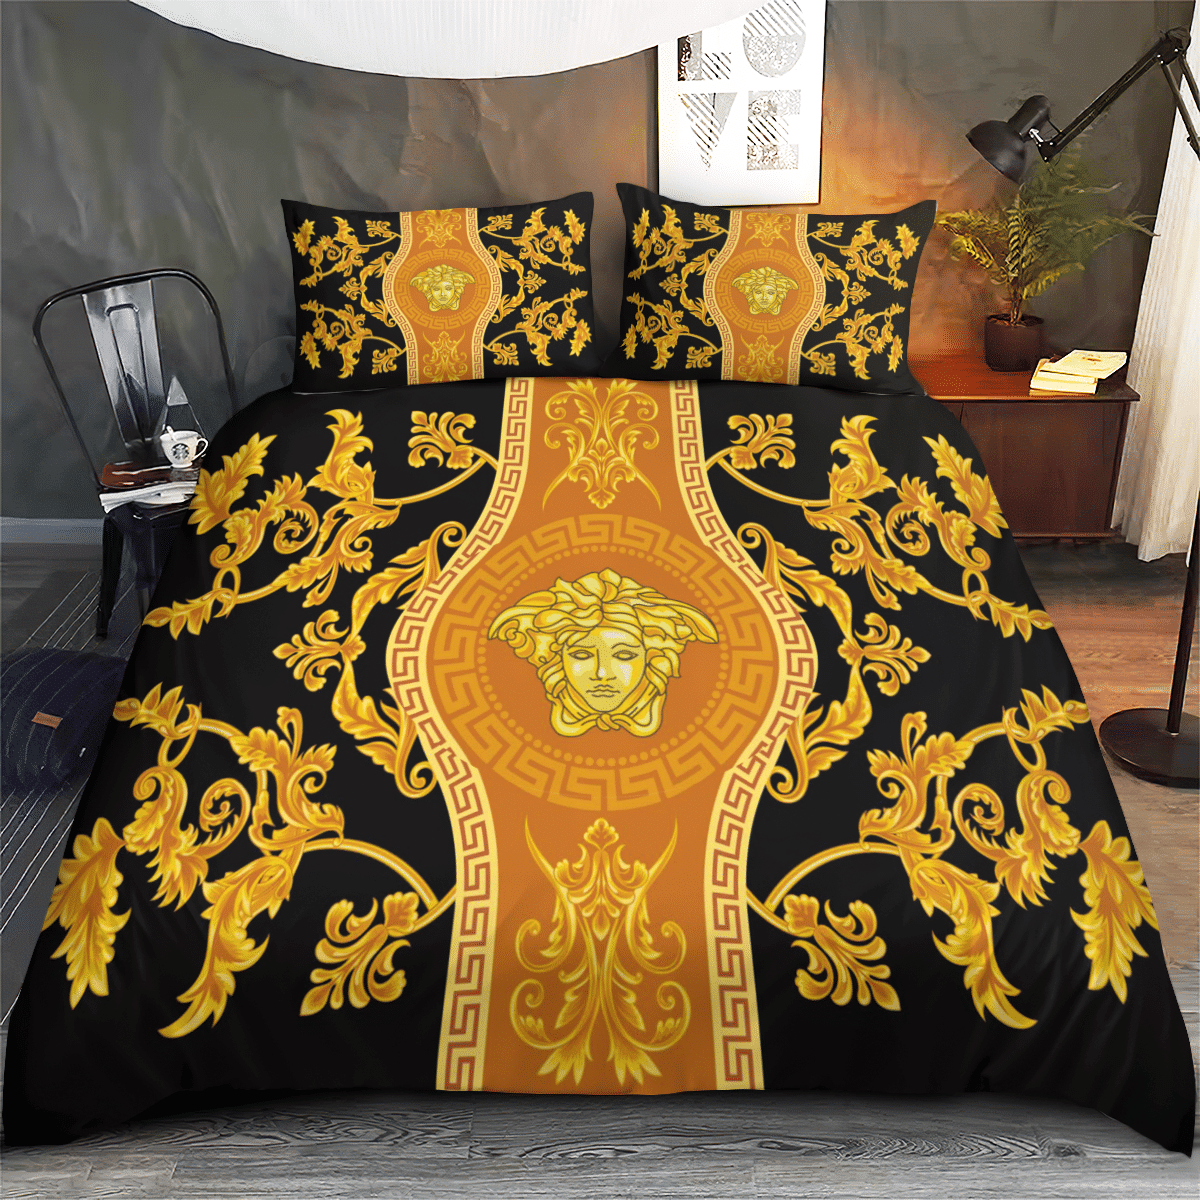 BVS19 LIMITED EDITION 3D CUSTOMIZED BEDDING SETS #3